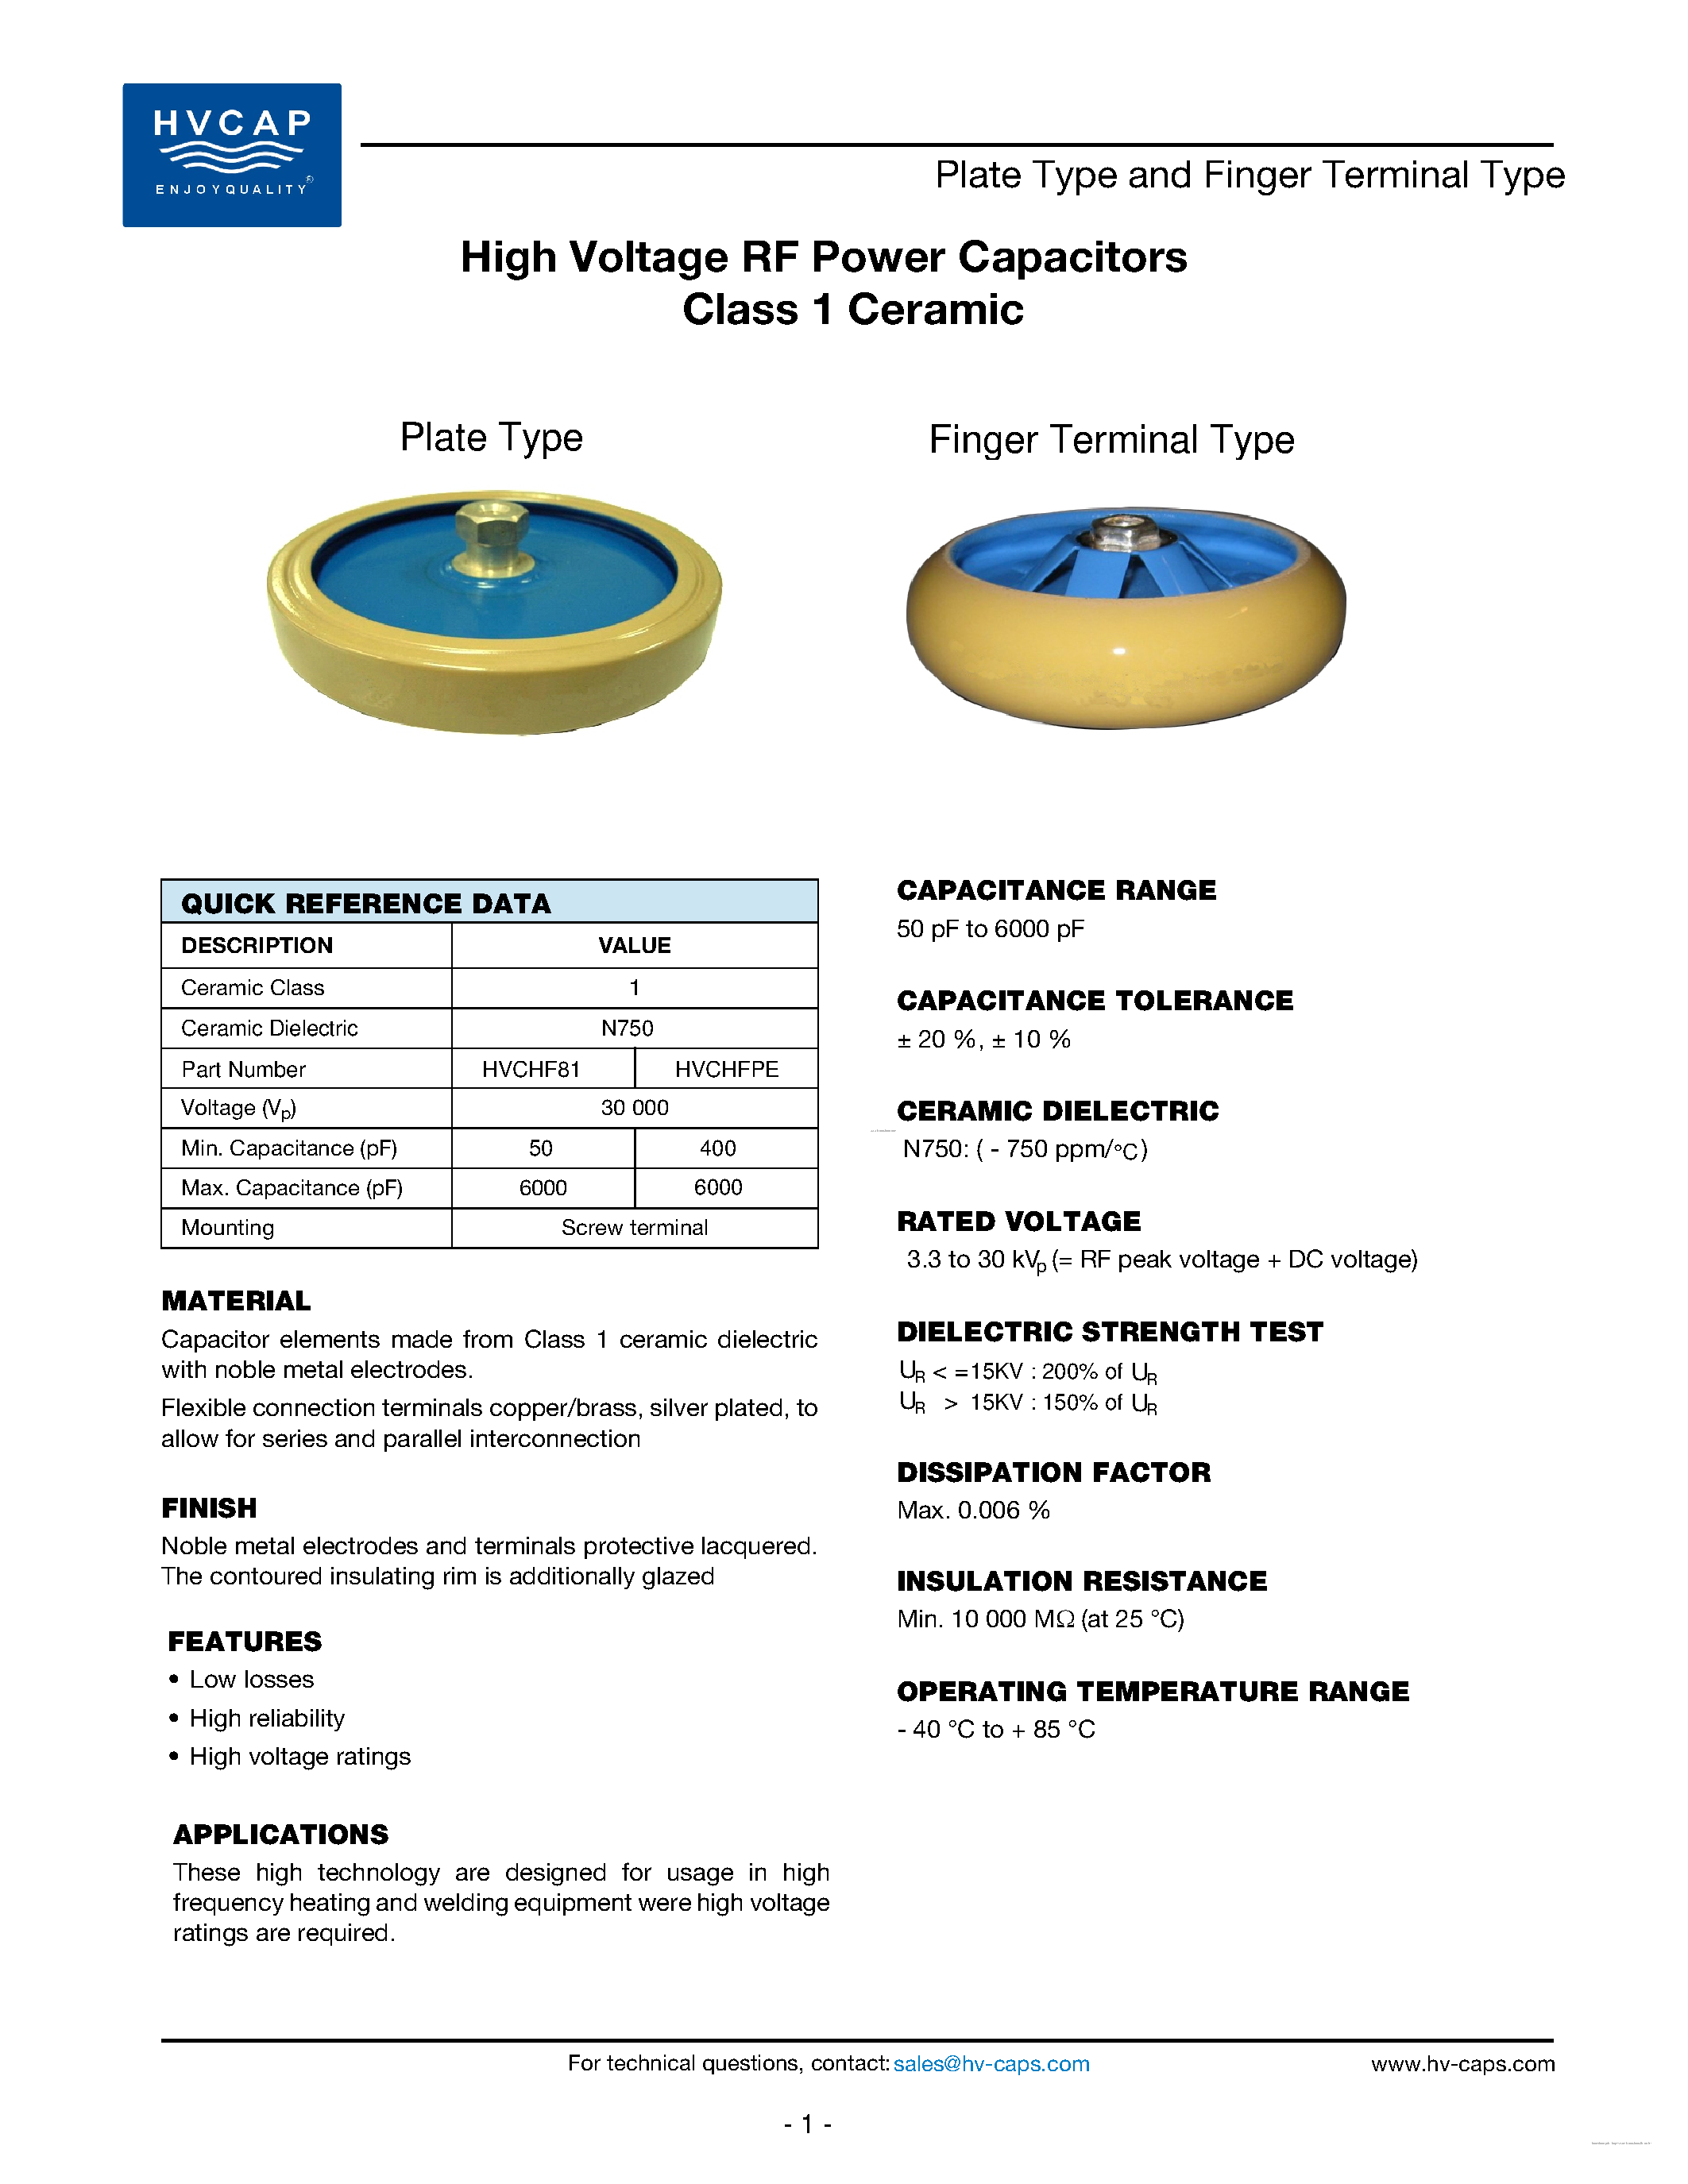 Datasheet HVCHF81-A-50P-15 - High Voltage RF Power Capacitors page 1